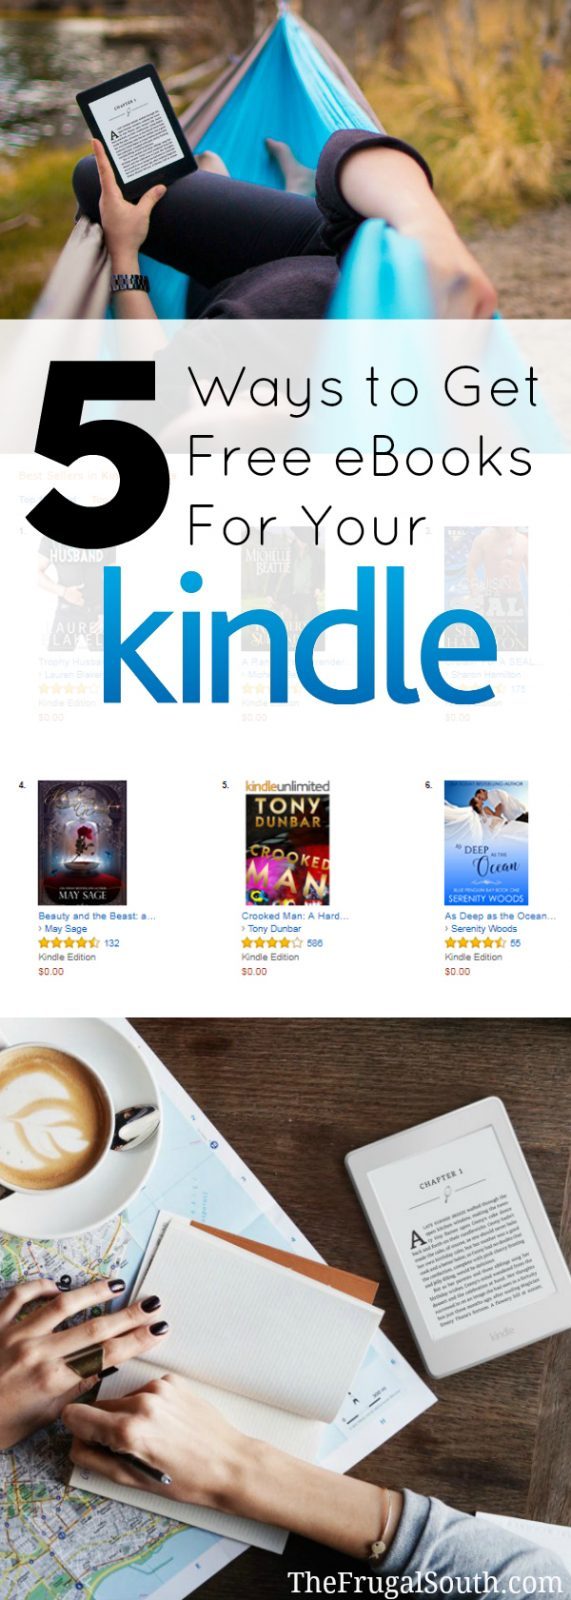 How to get free eBooks to read on your Kindle or any device!